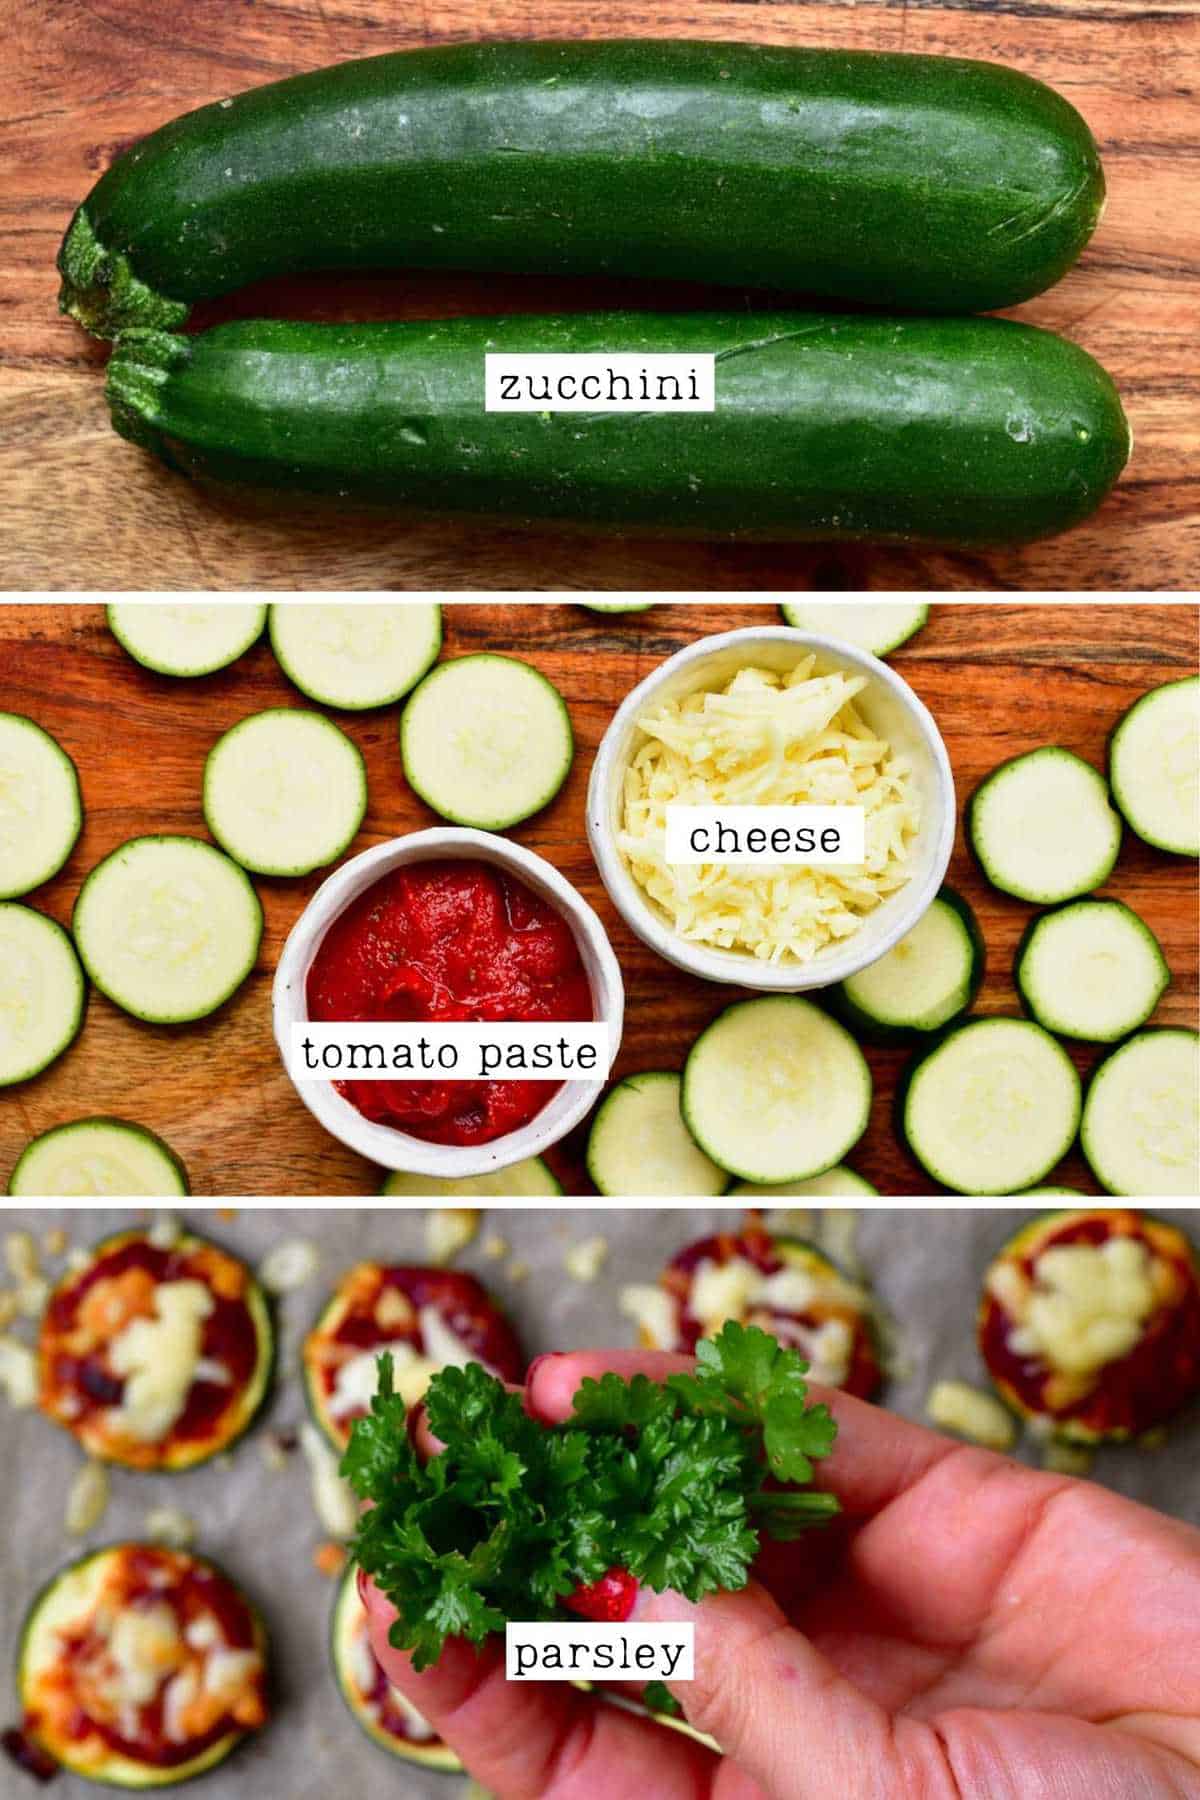 Ingredients for Zucchini Pizza